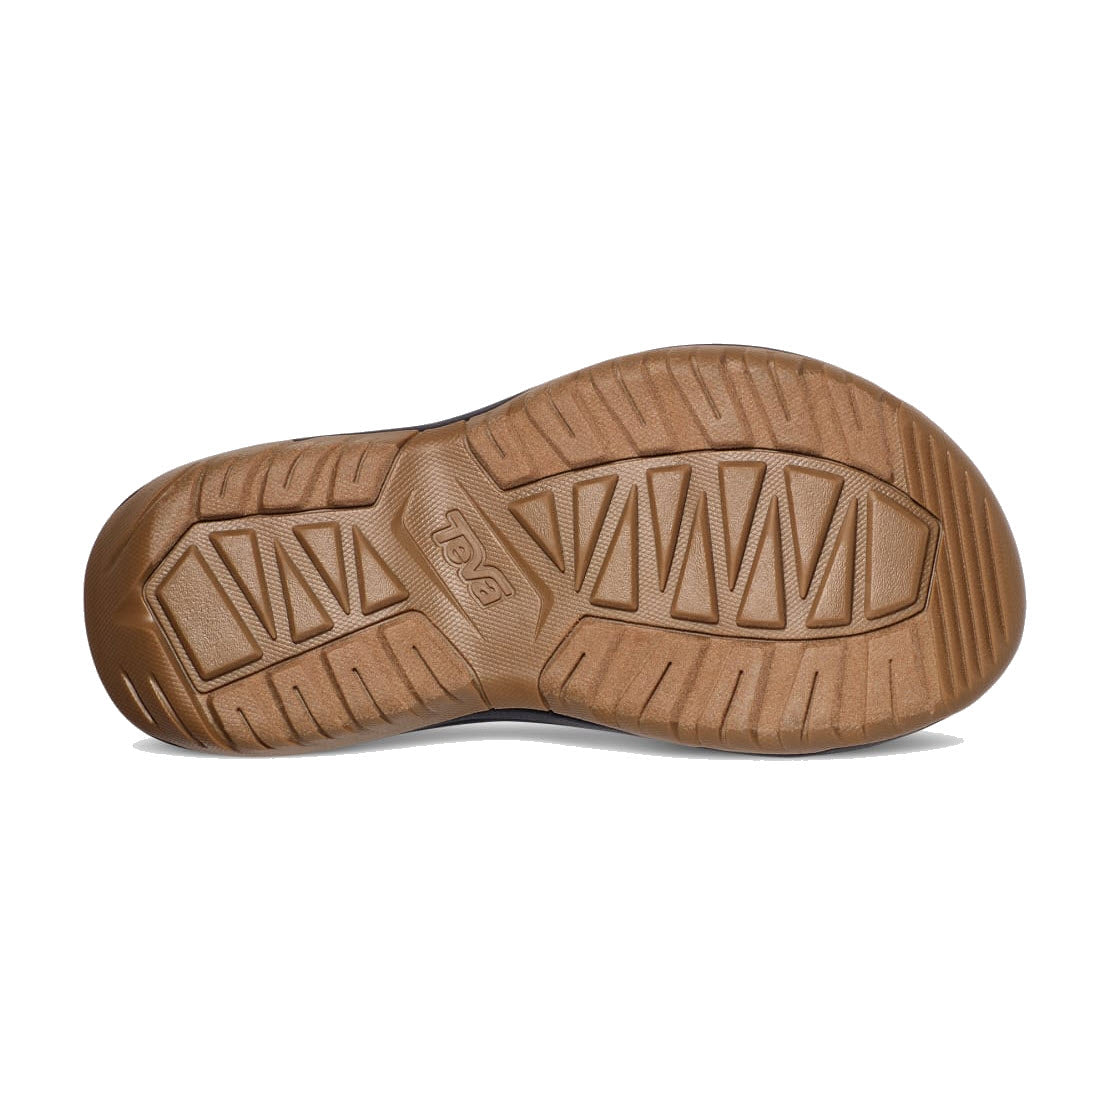 Bottom view of a TEVA HURRICANE XLT2 90S ARCHIVAL REVIVAL - WOMENS sandal sole displaying geometric tread pattern and embossed with the brand name &quot;Teva.